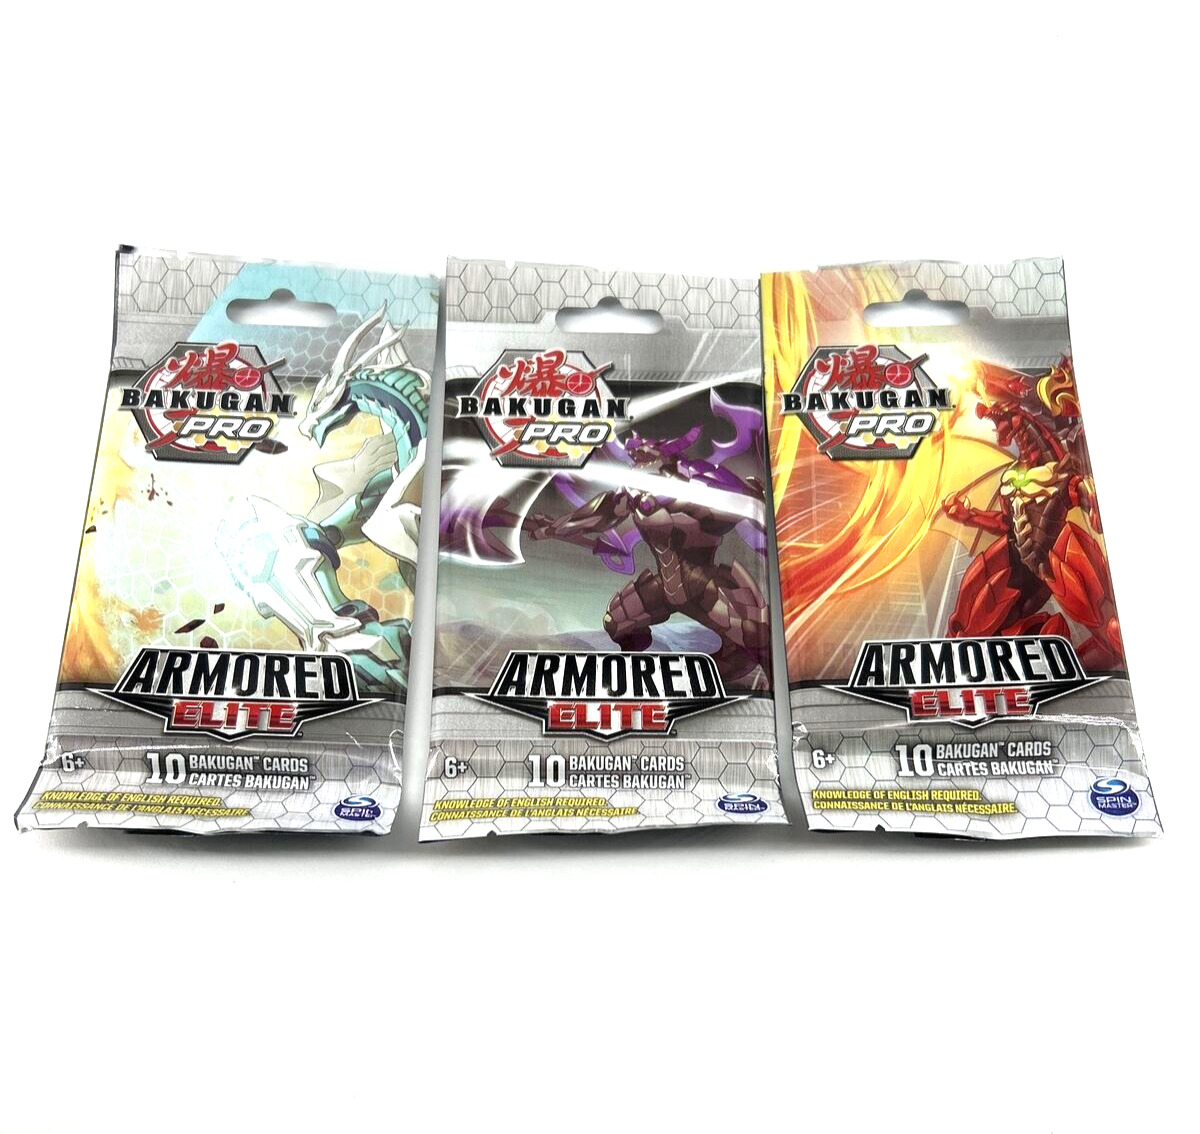 Bakugan Pro Armored Elite Booster Pack 10 Collectible Trading Cards LOT OF 3 NEW